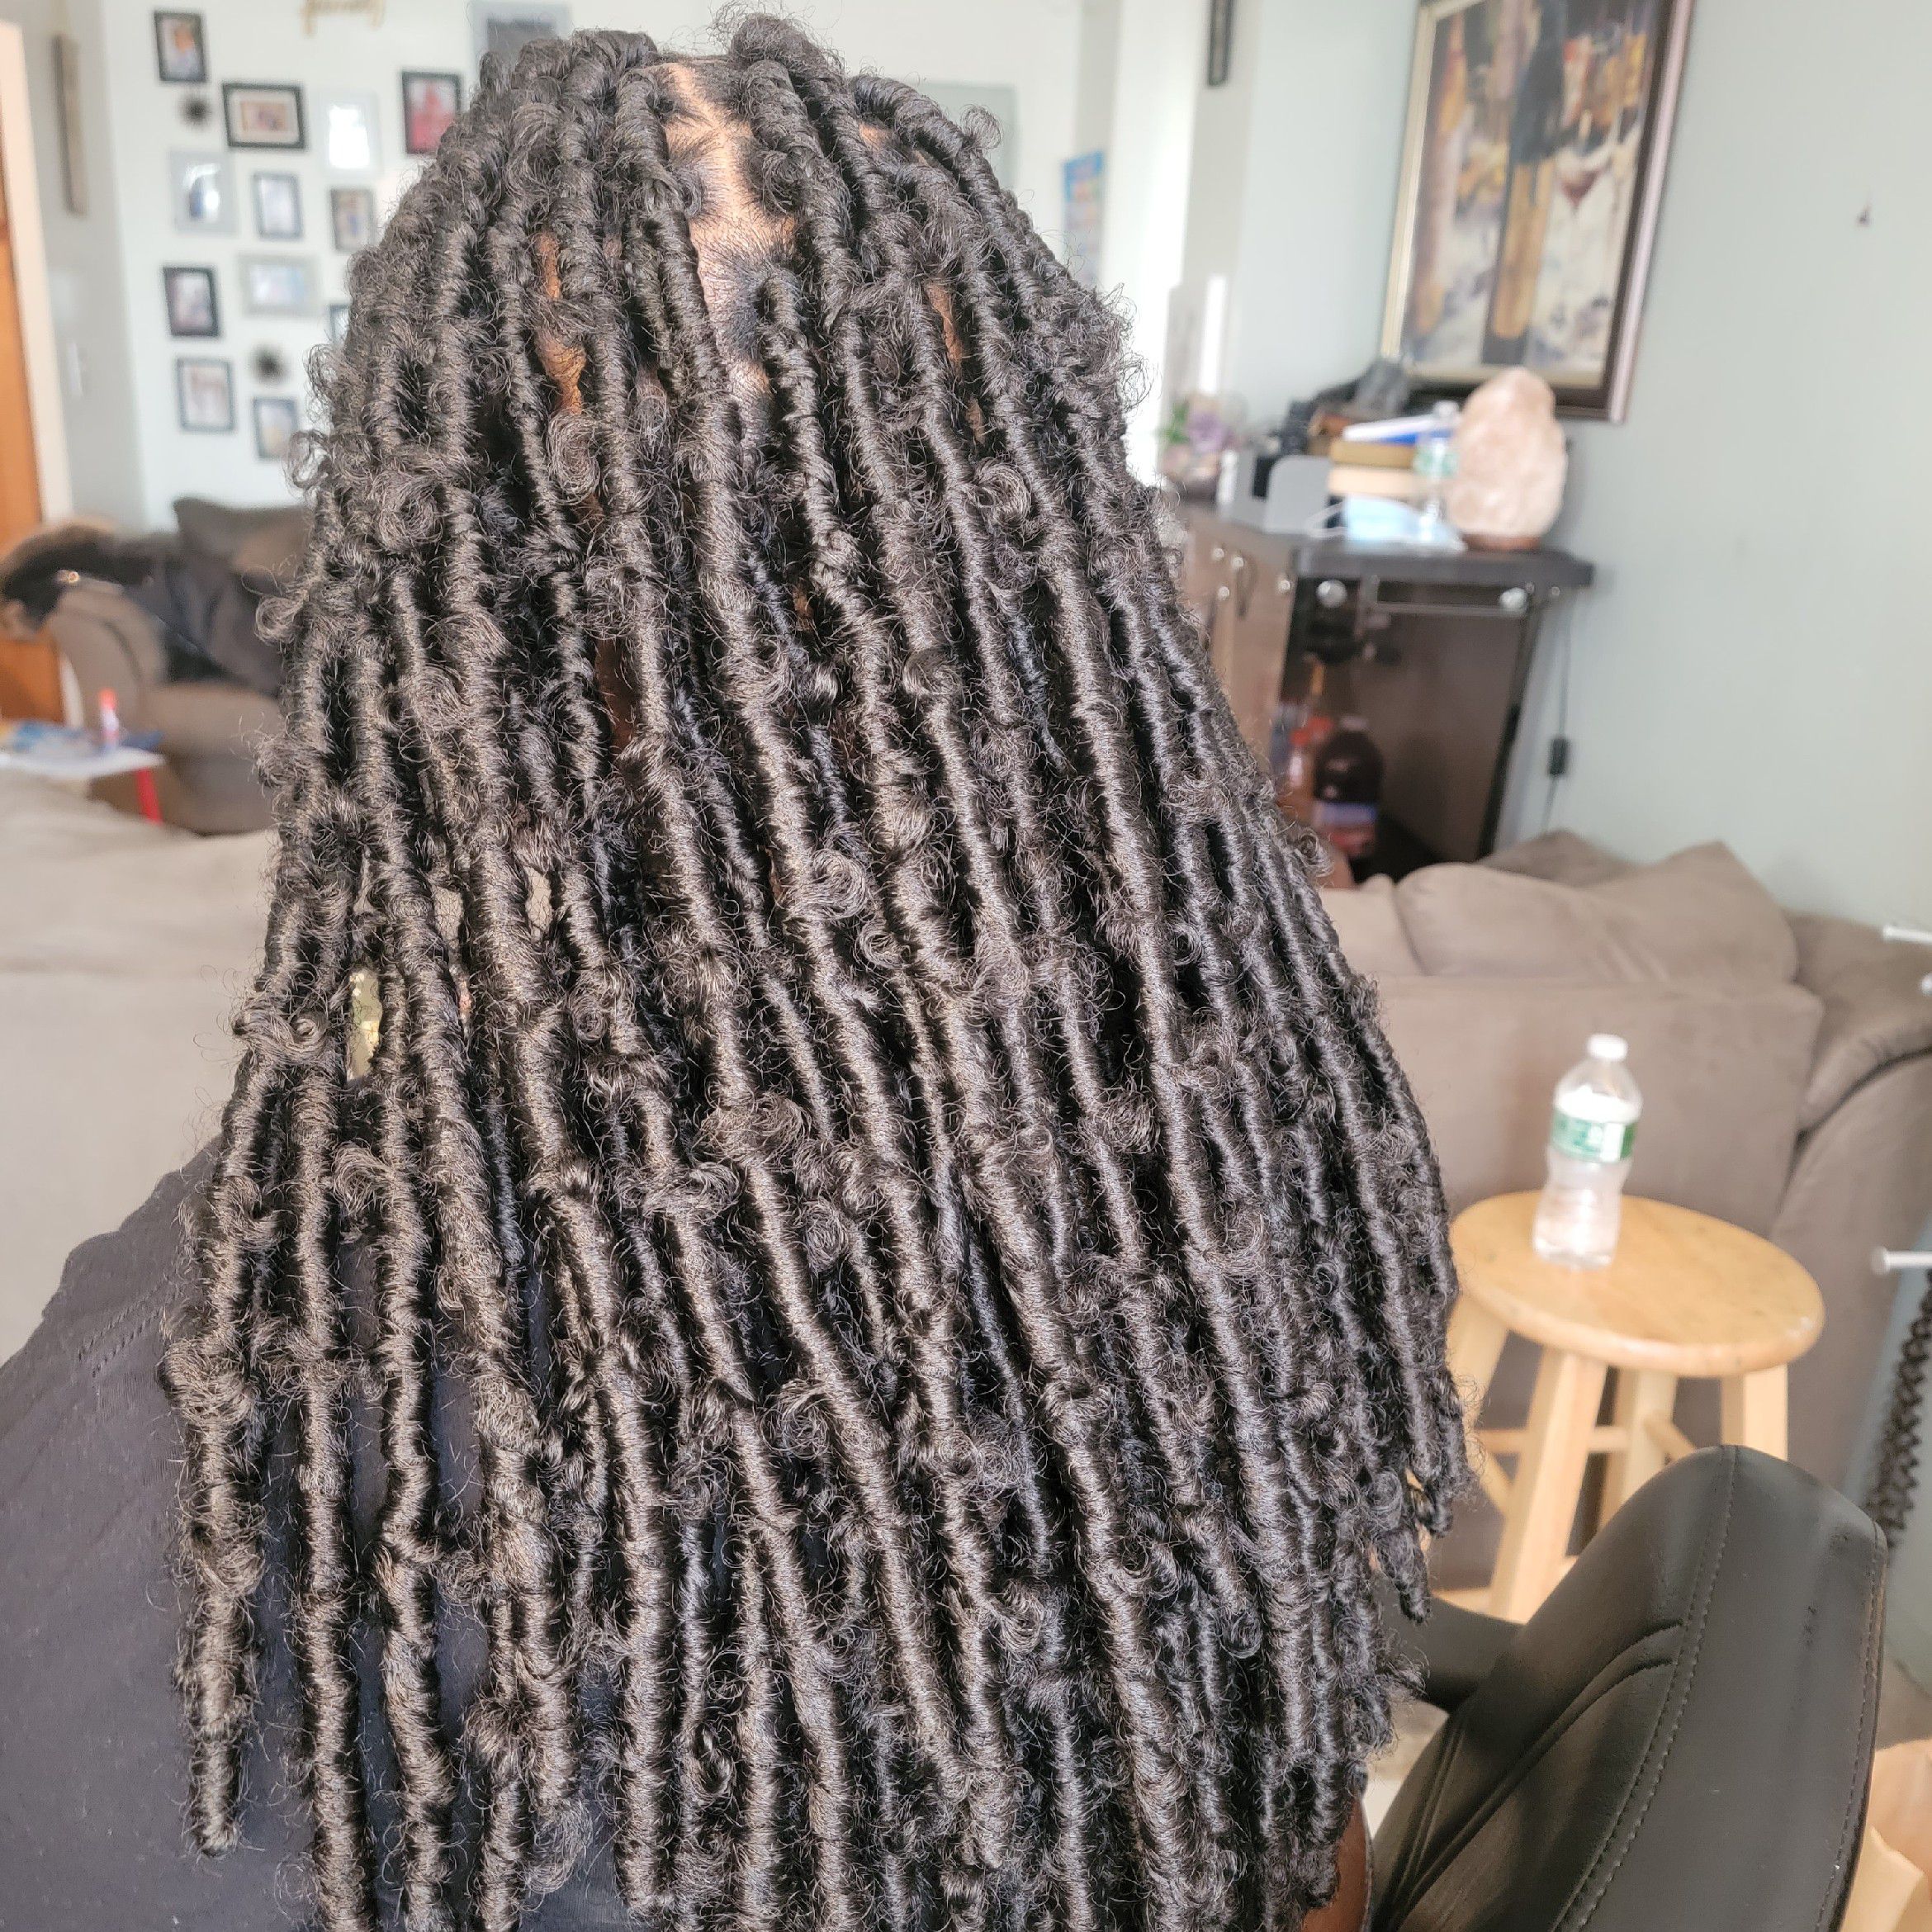 Butterfly locs mid back/hair included portfolio